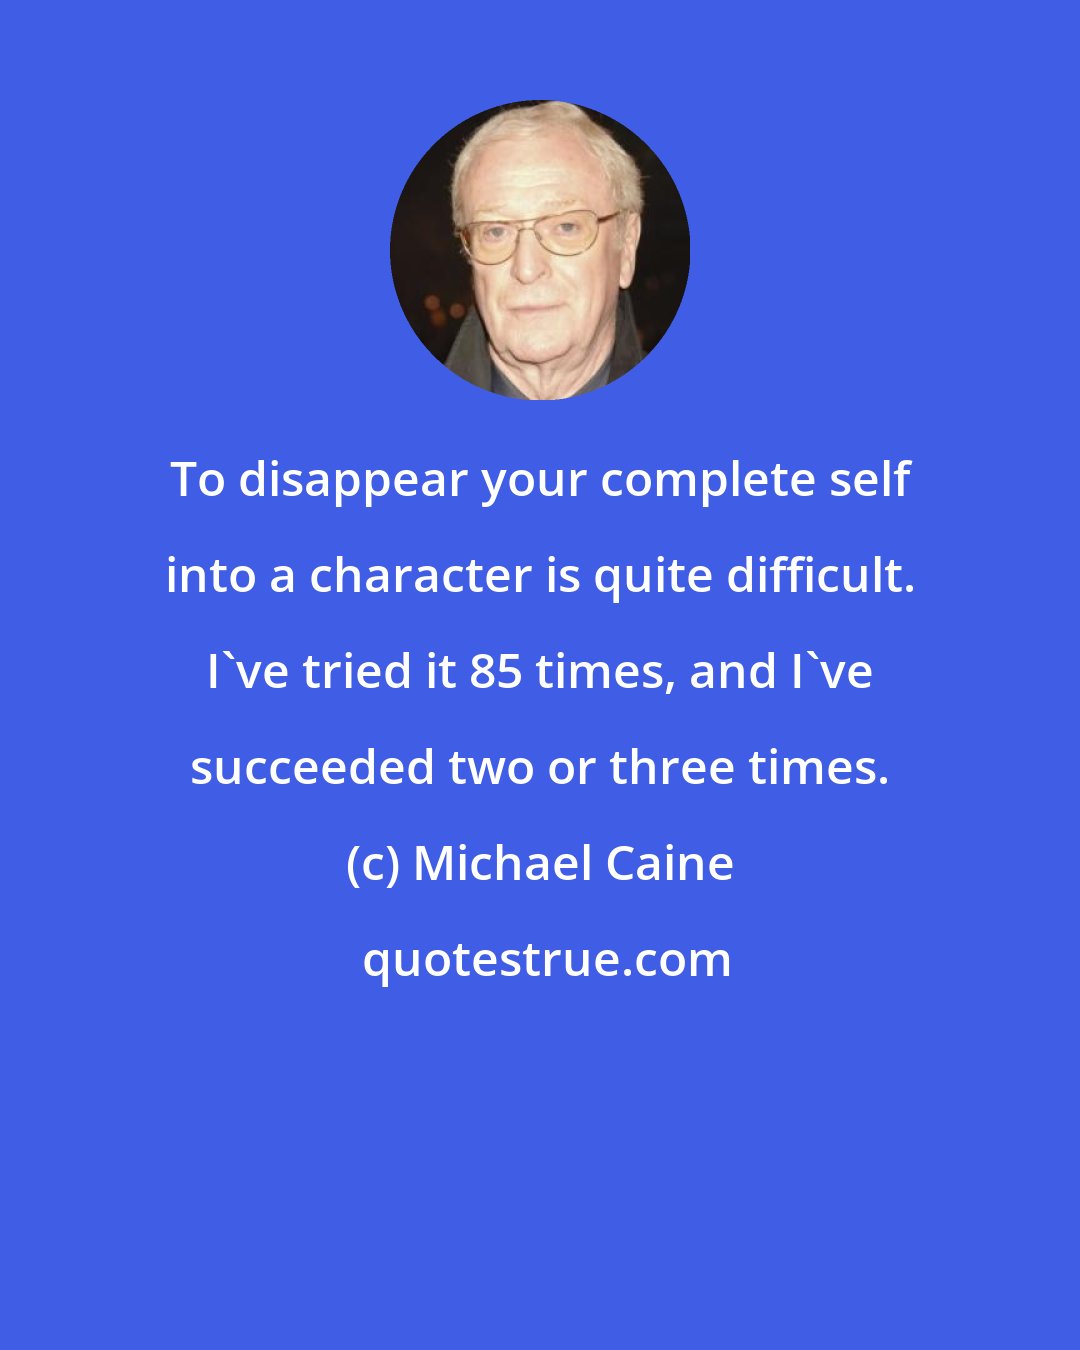 Michael Caine: To disappear your complete self into a character is quite difficult. I've tried it 85 times, and I've succeeded two or three times.